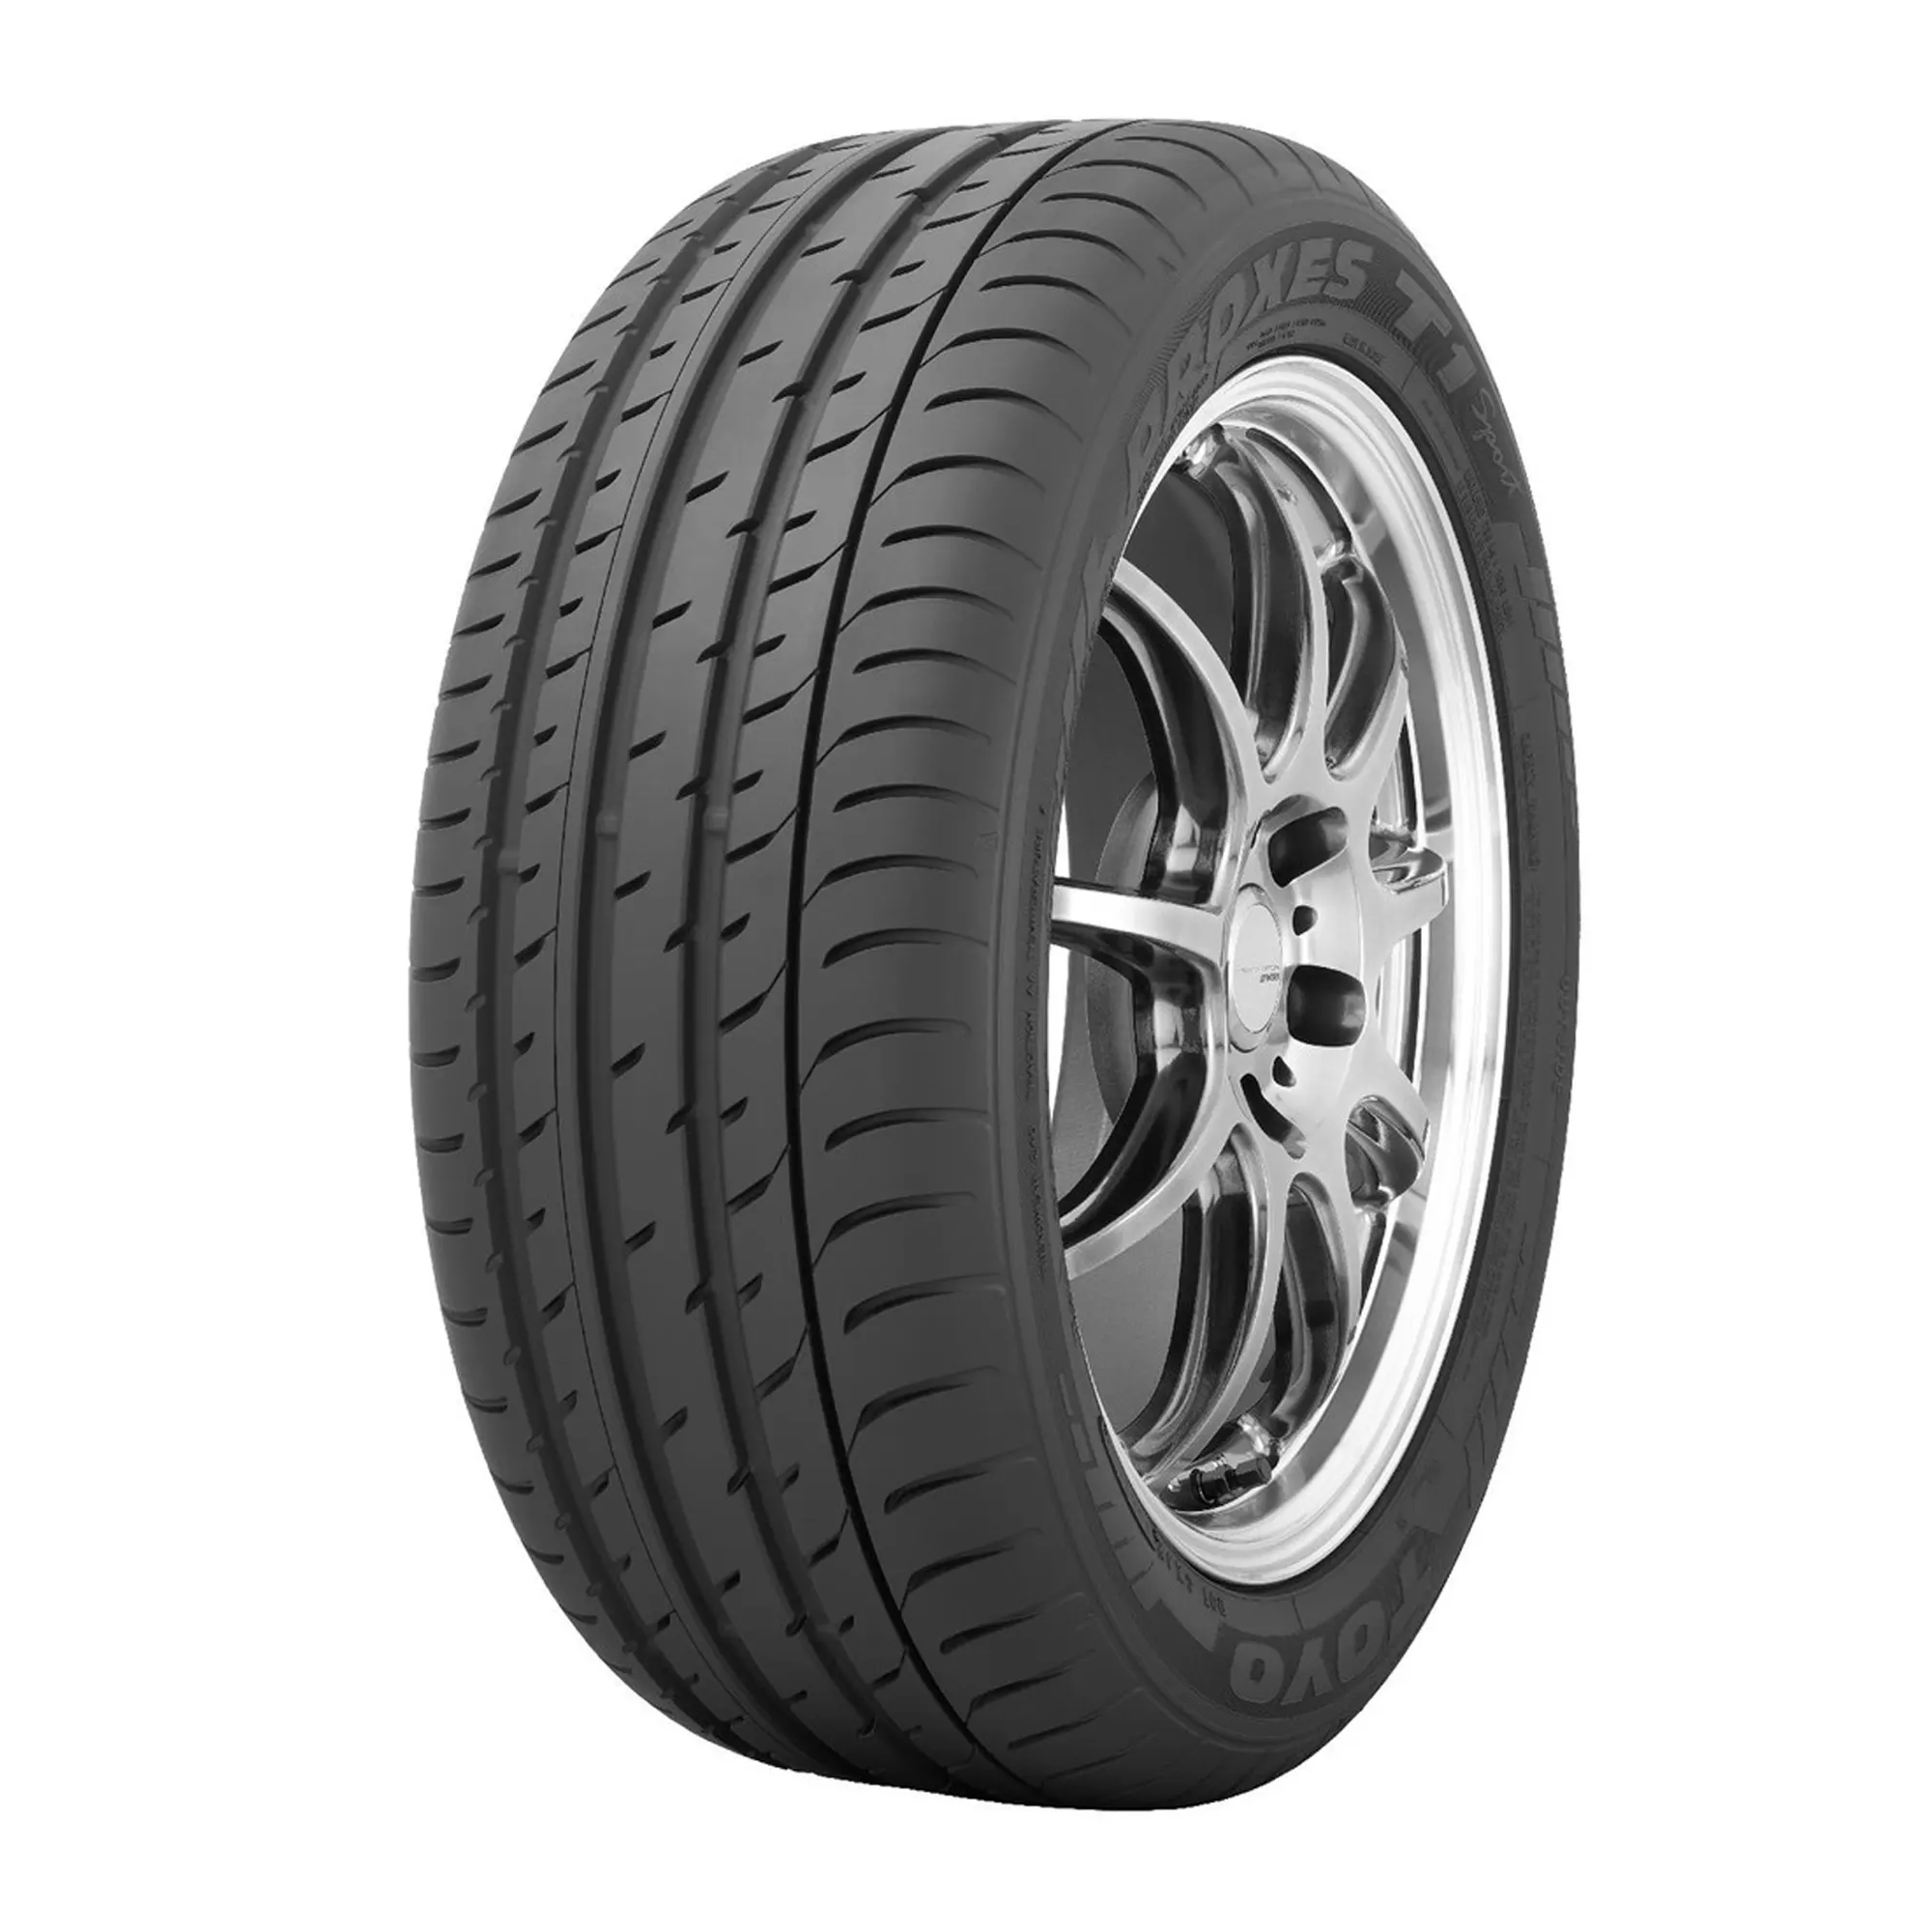 Шина 245/40R19 98Y PROXES T1 SPORT